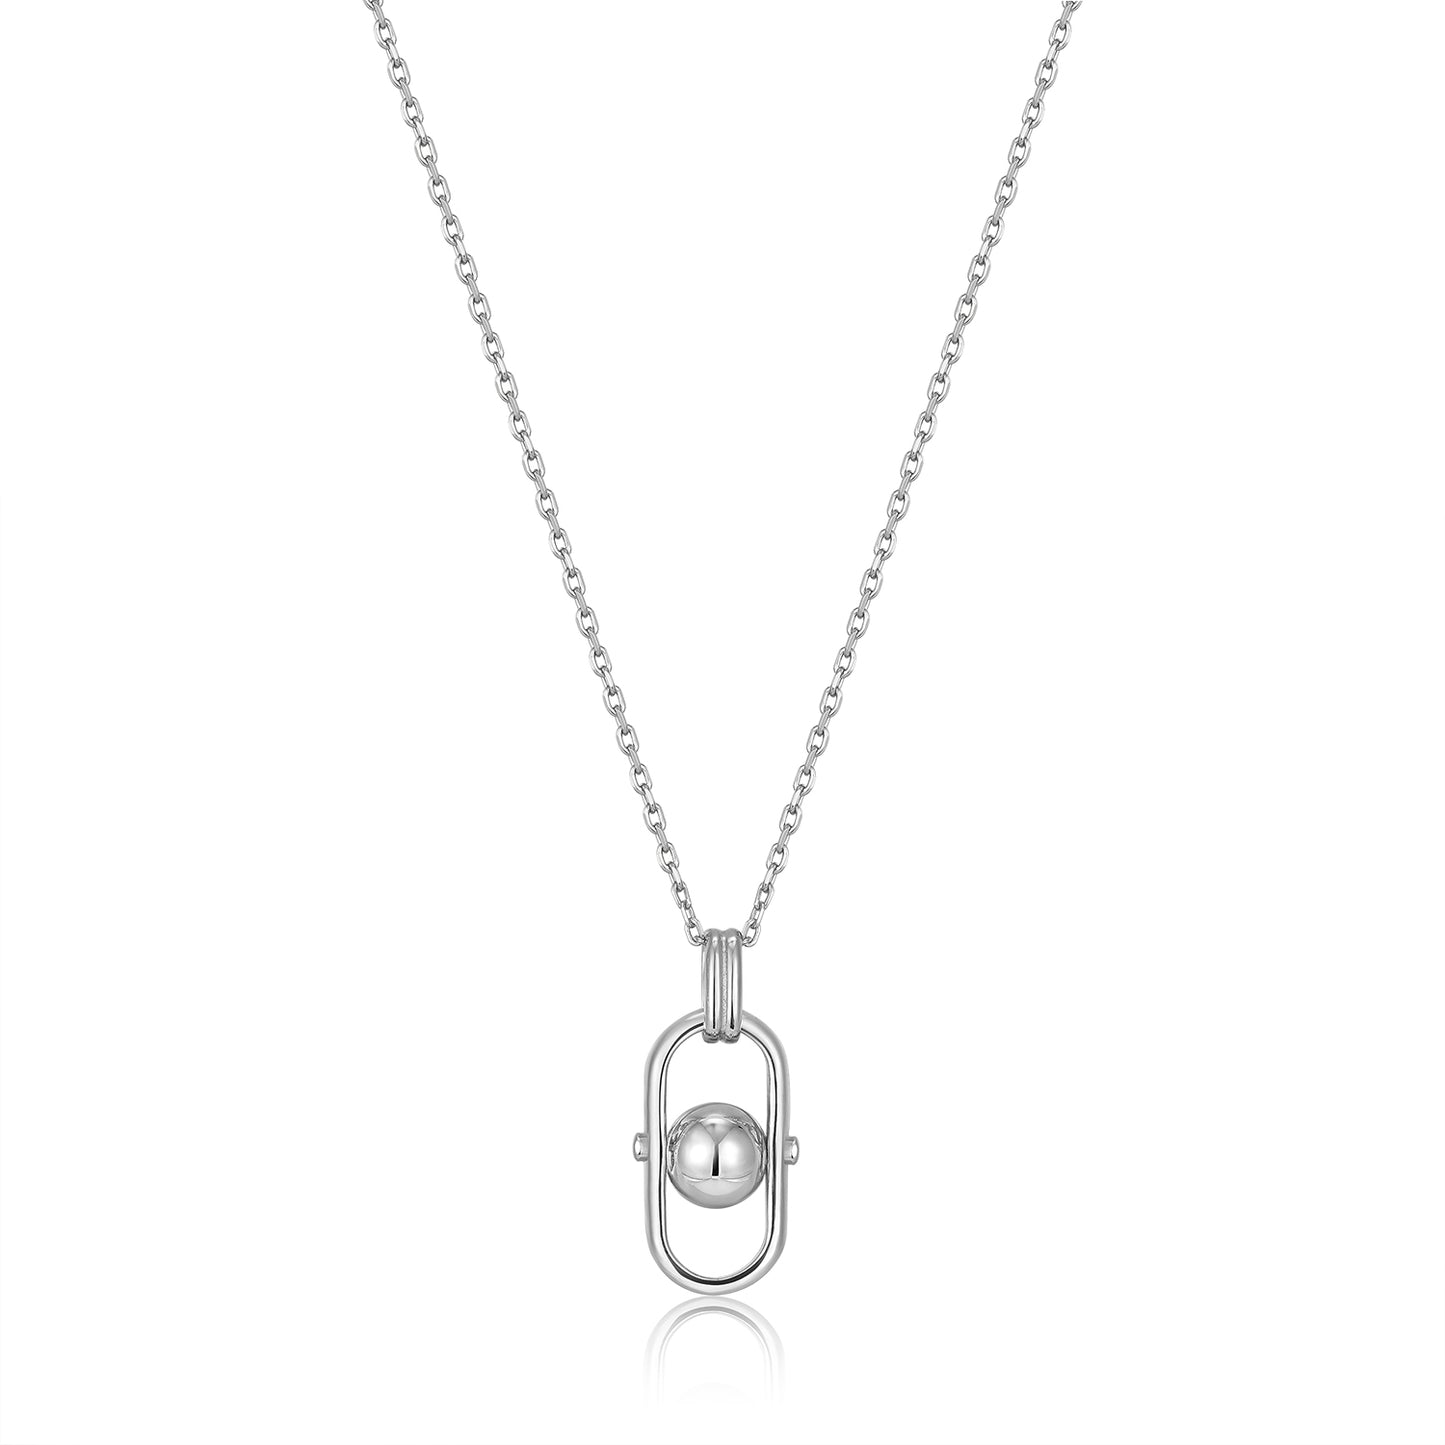 Ania Haie Rhodium Plated Silver Orb Link Drop Pendant Necklace